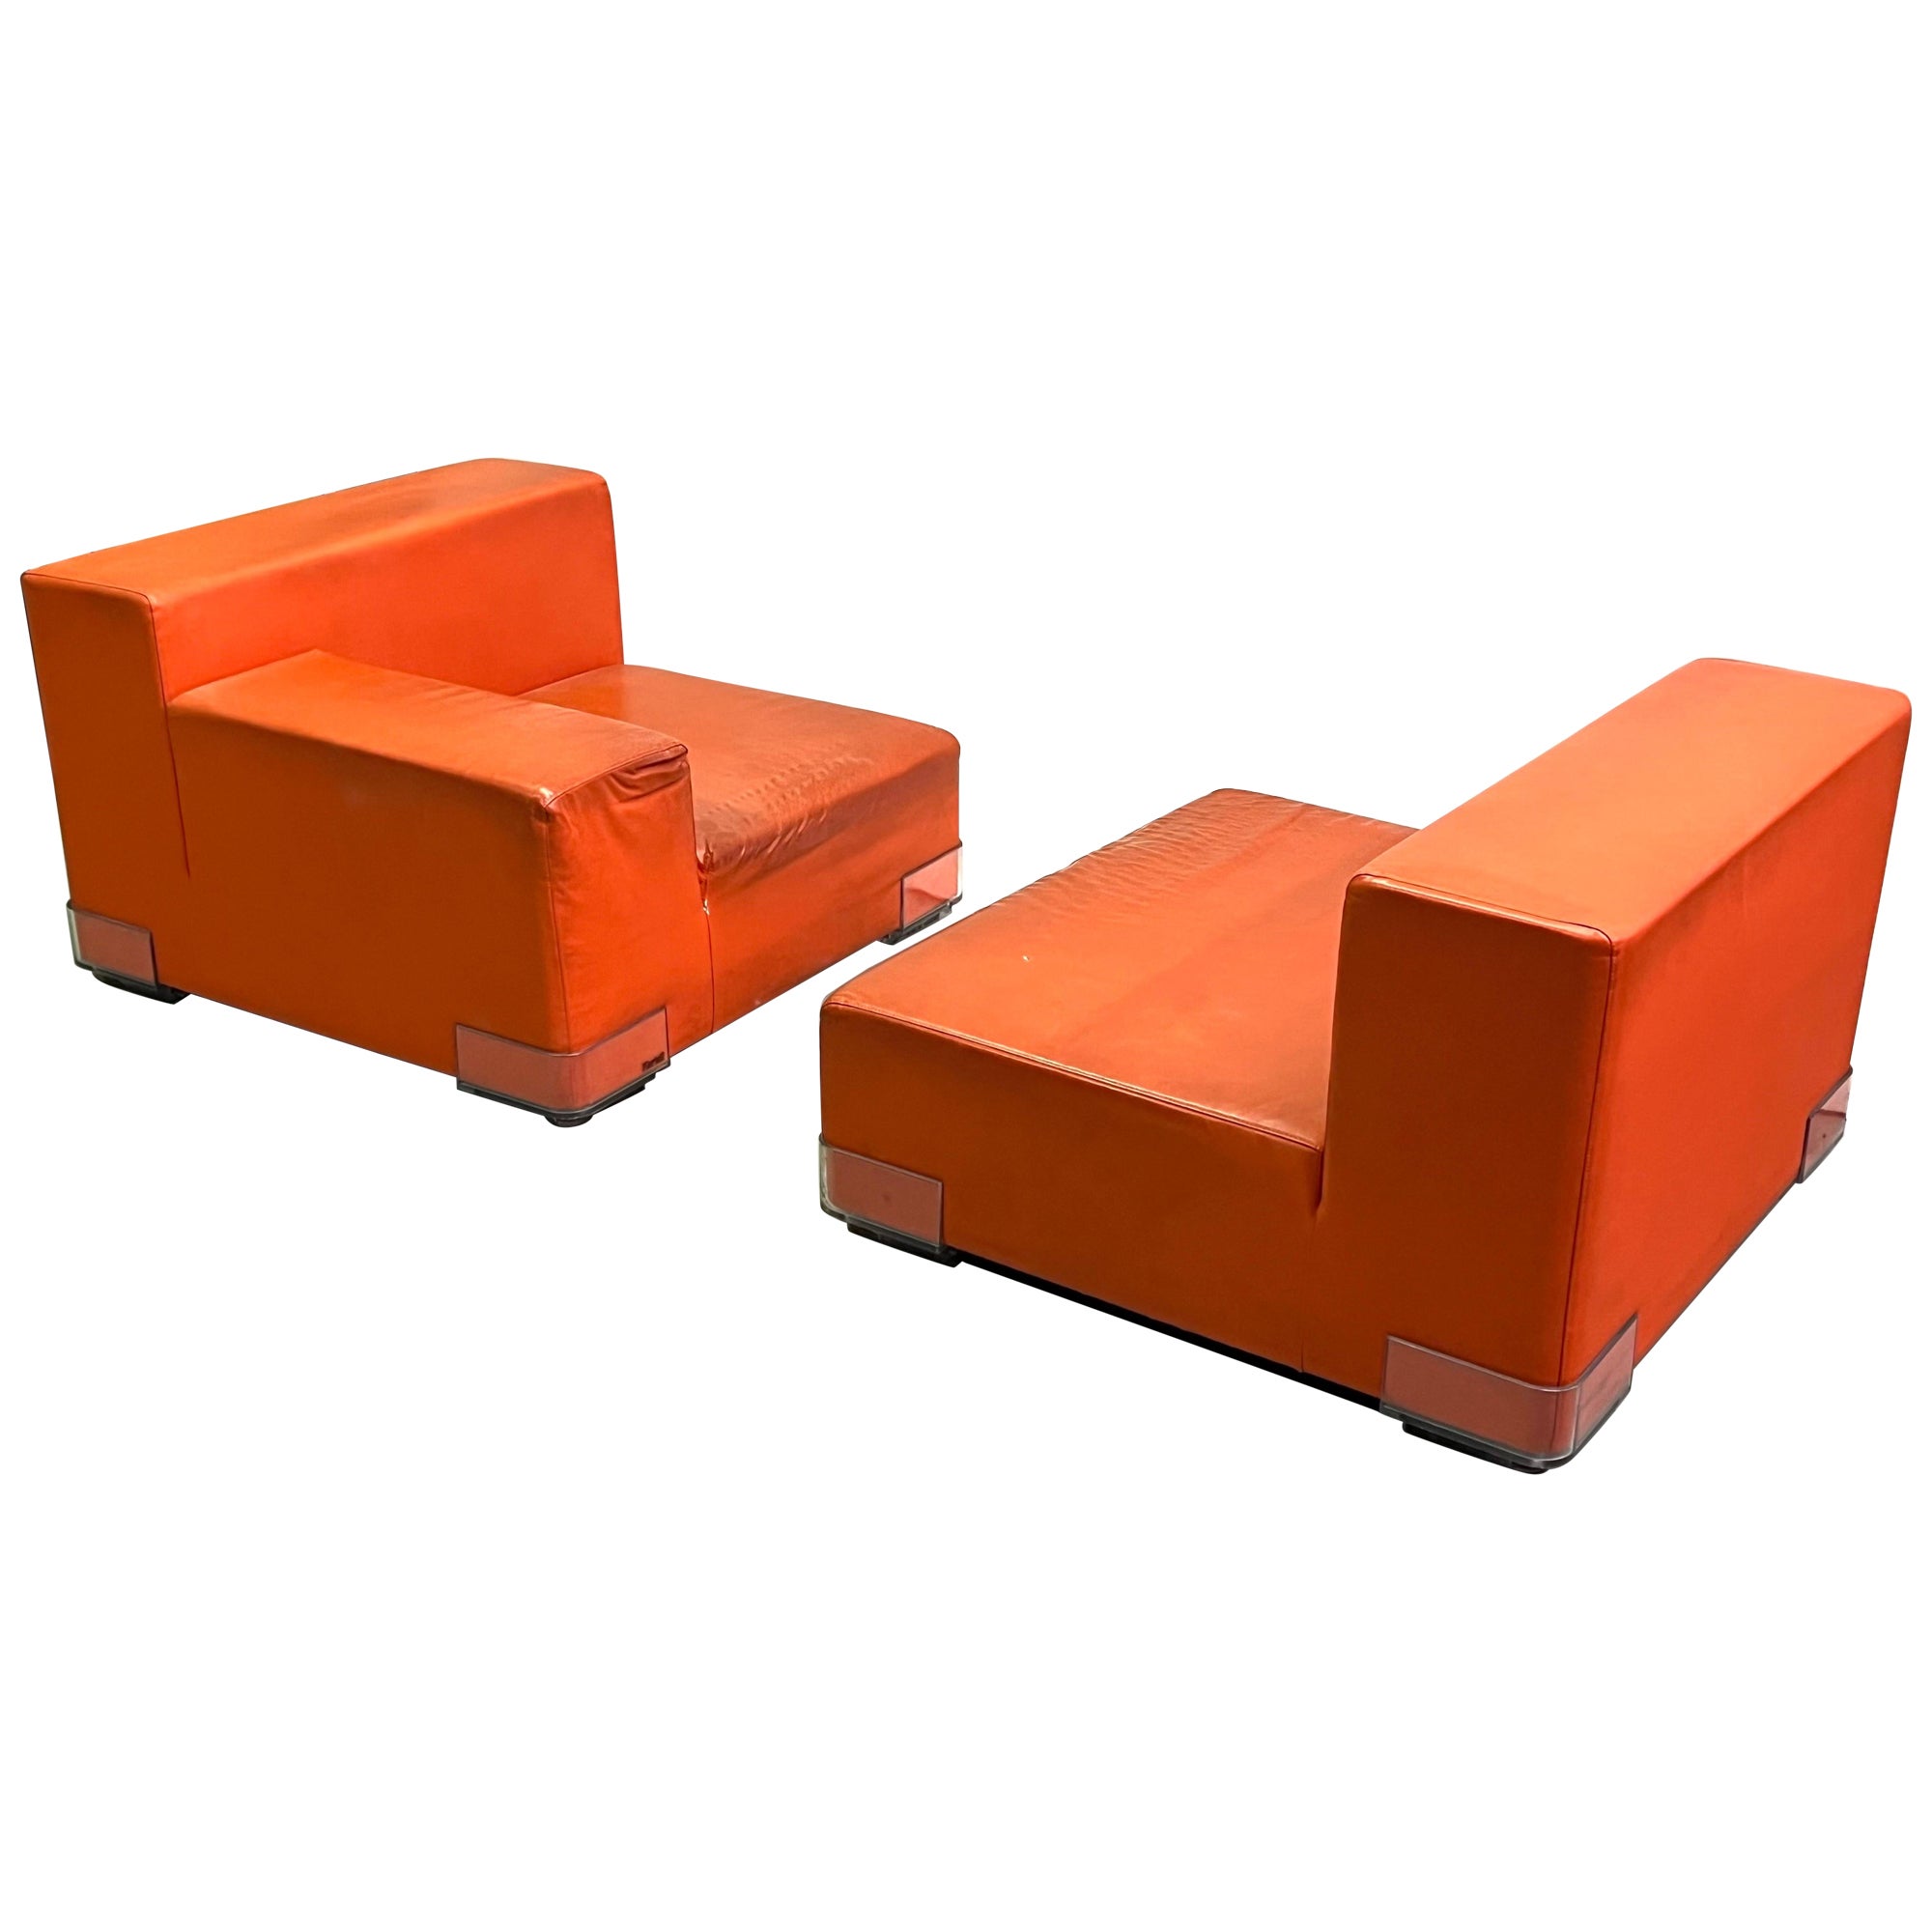 Italian Mid-Century Modern Pair of Lounge Chairs by Piero Lissoni   For Sale